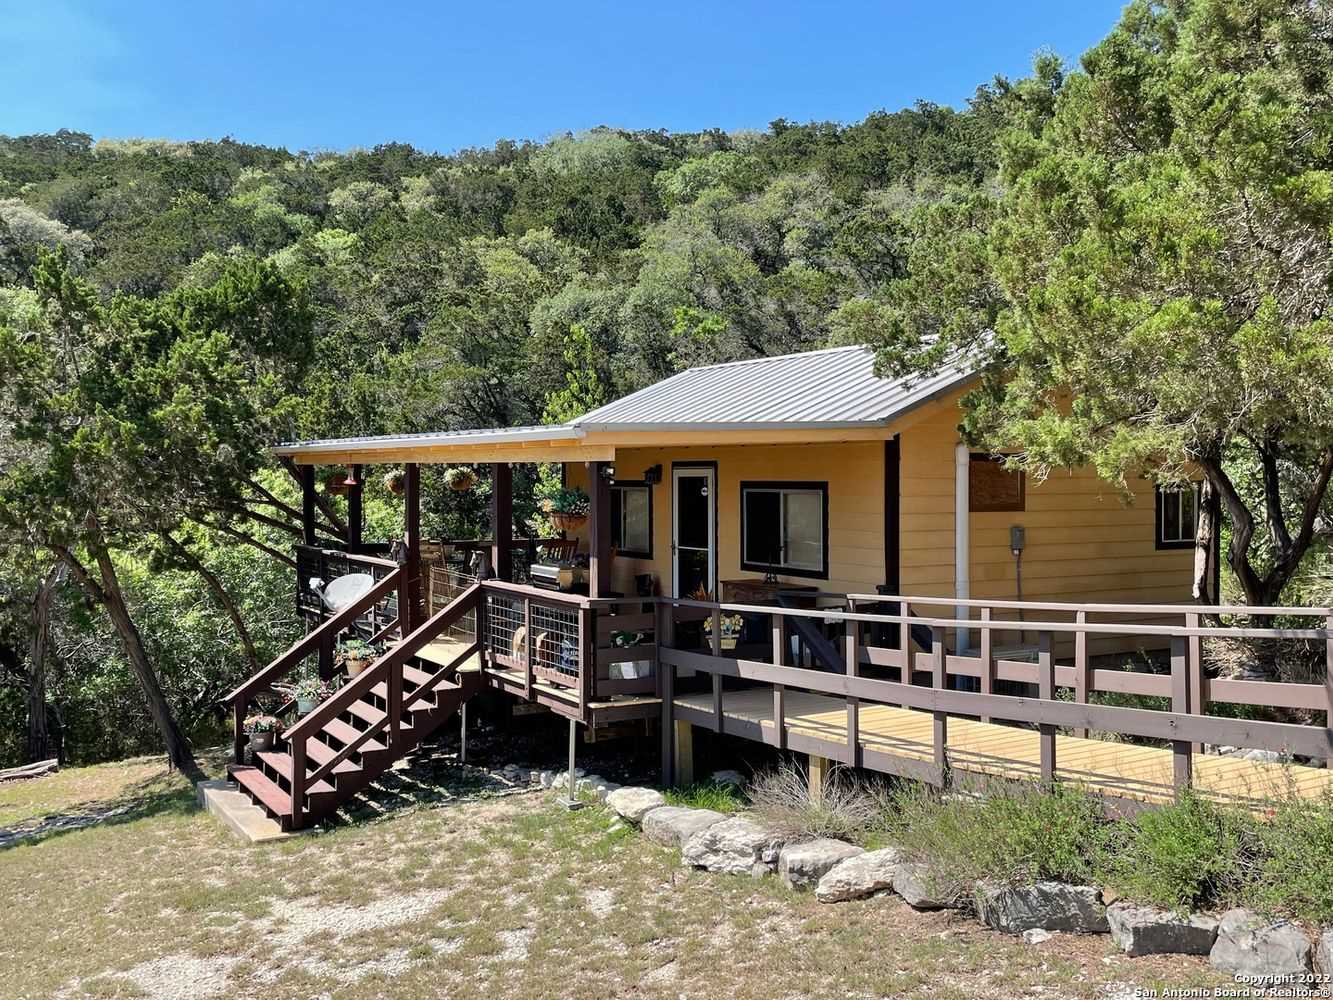                                                 Check out Giddy Up for a romantic mountainside Hill Country getaway!